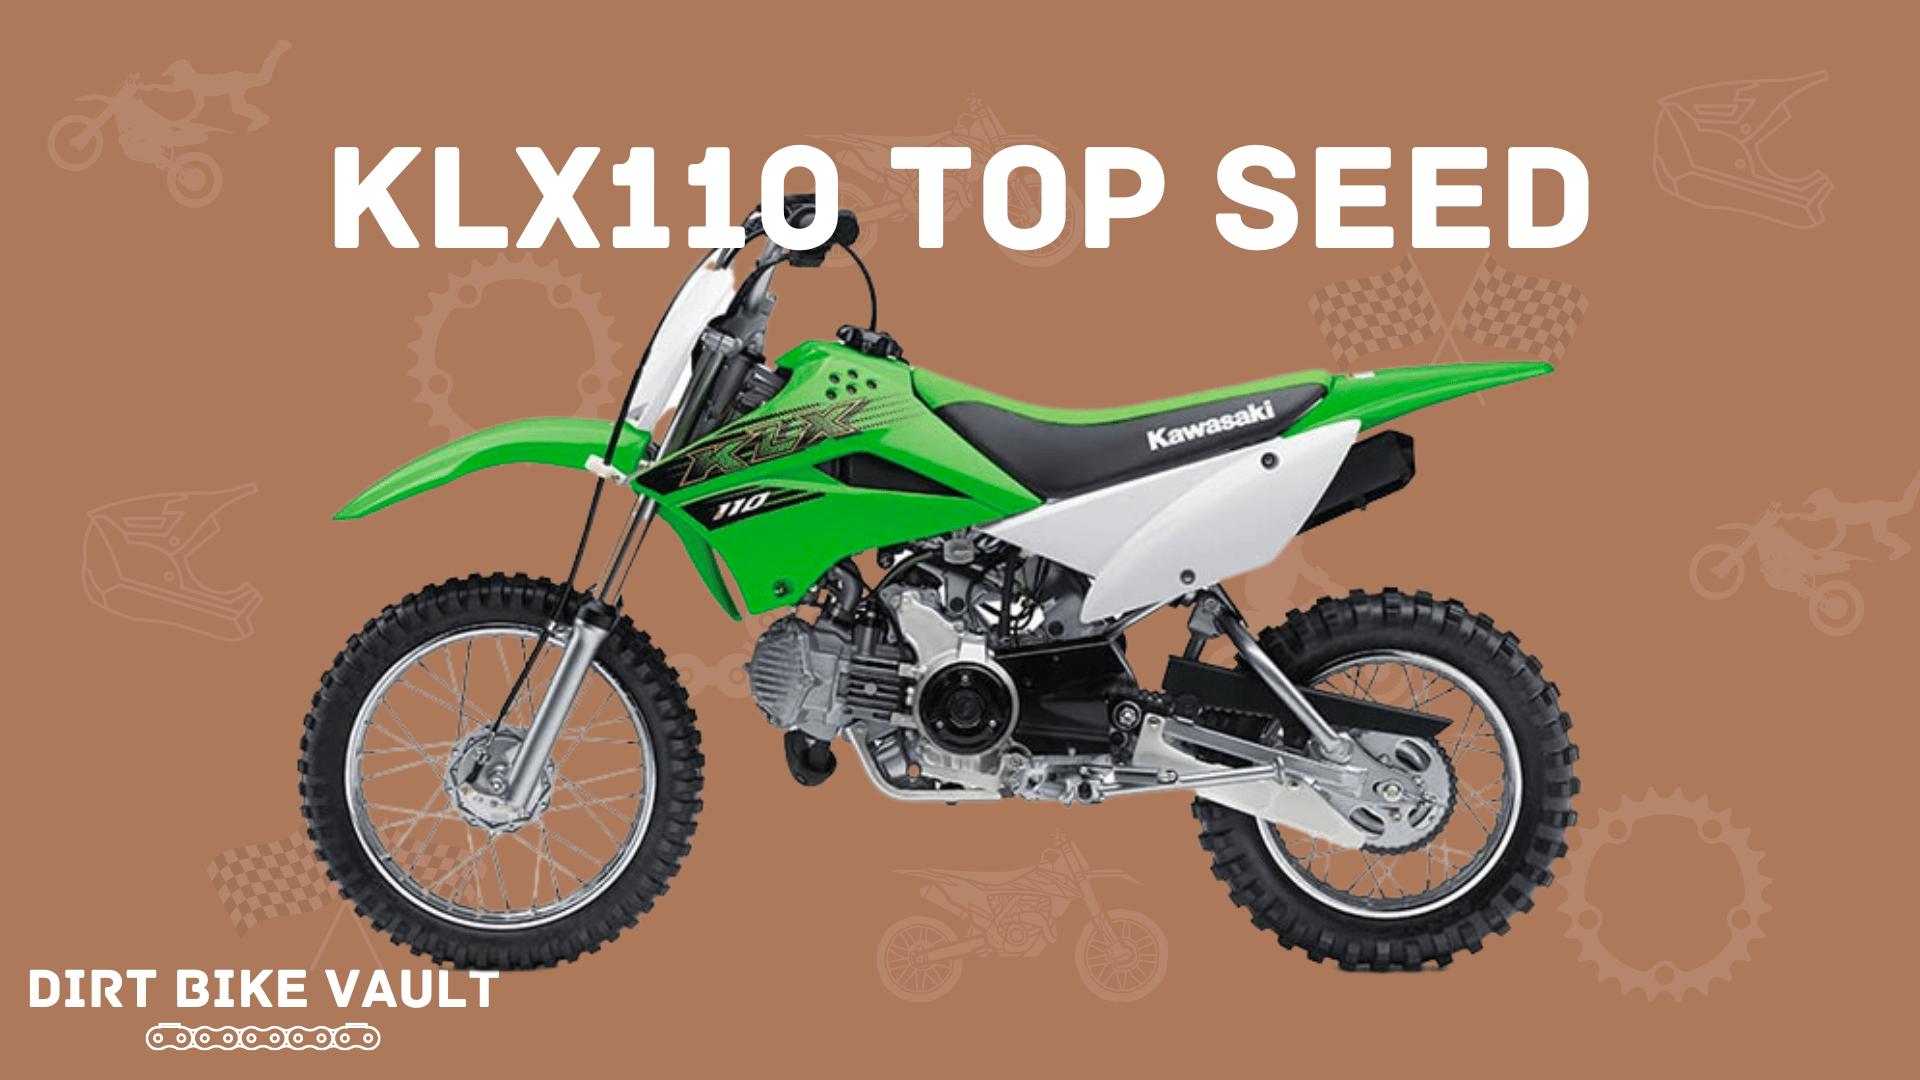 KLX110 top speed in white text on brown background with image of green KLX110 dirt bike